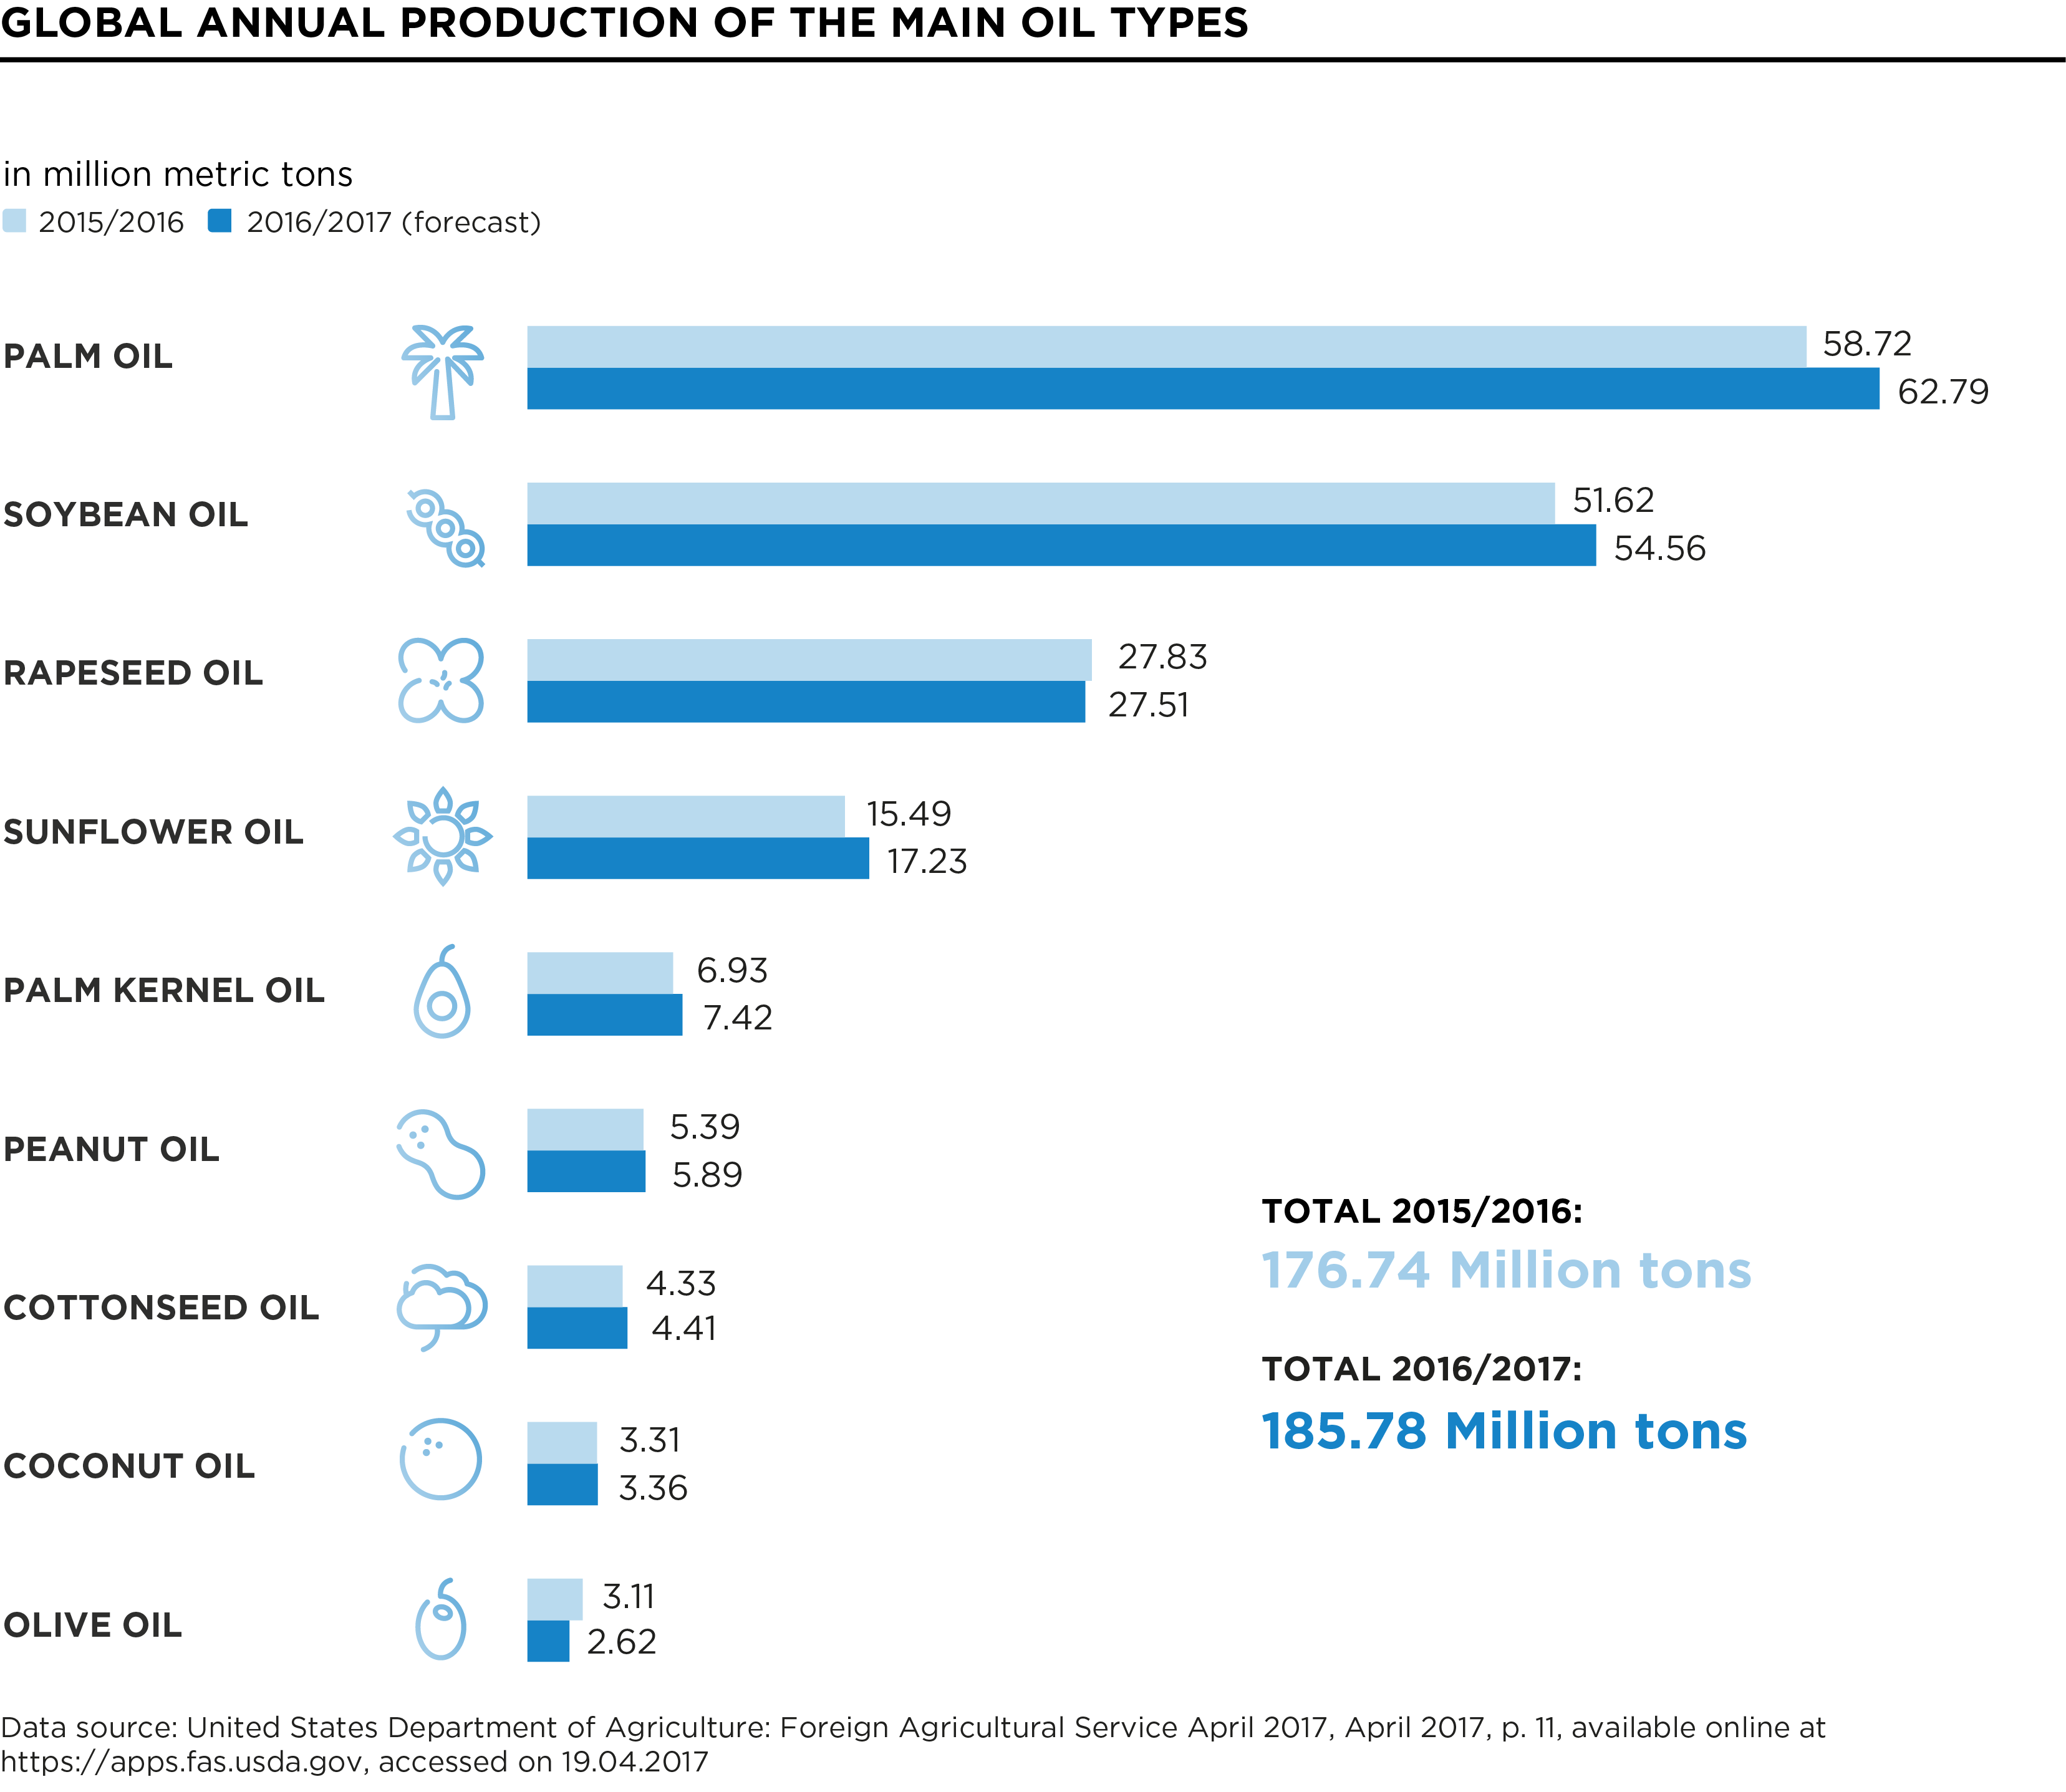 Global_Annual_Production_Main_Oil_Types_HighRes